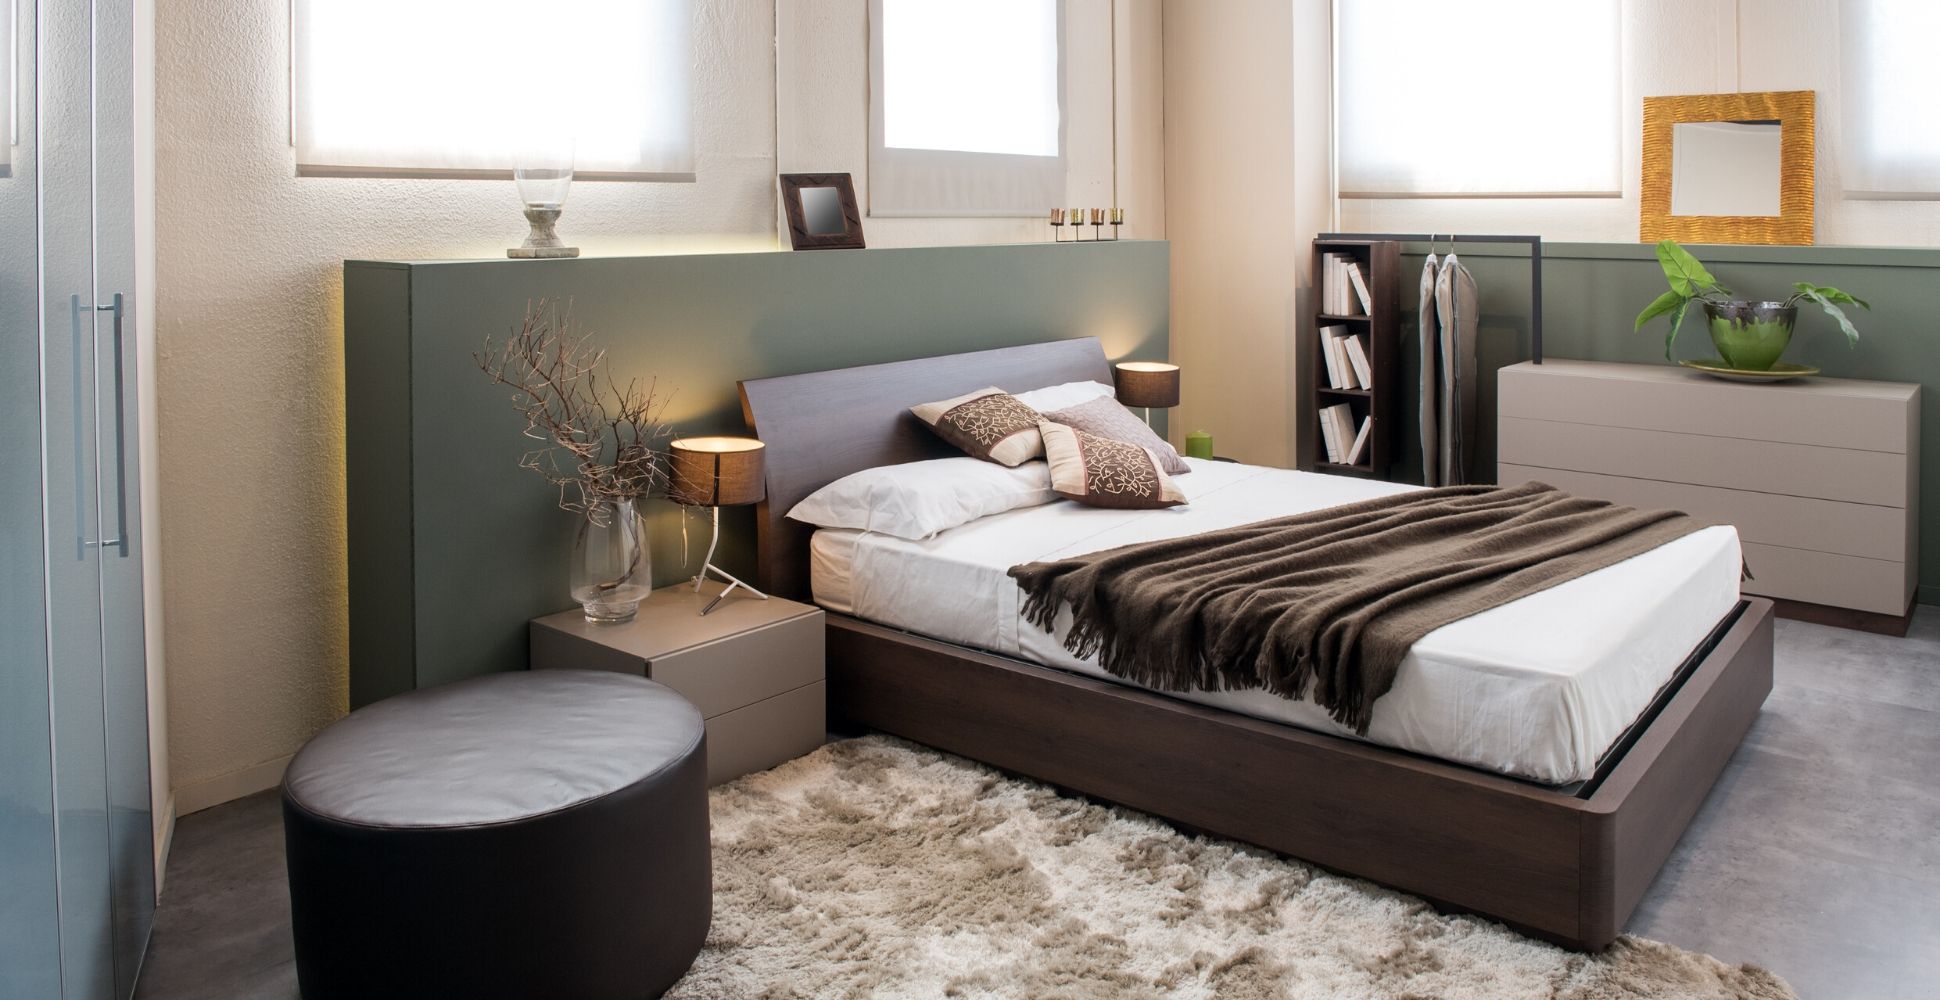 5 Best Ottoman Storage Beds UK (2022 Review) | Spruce Up!